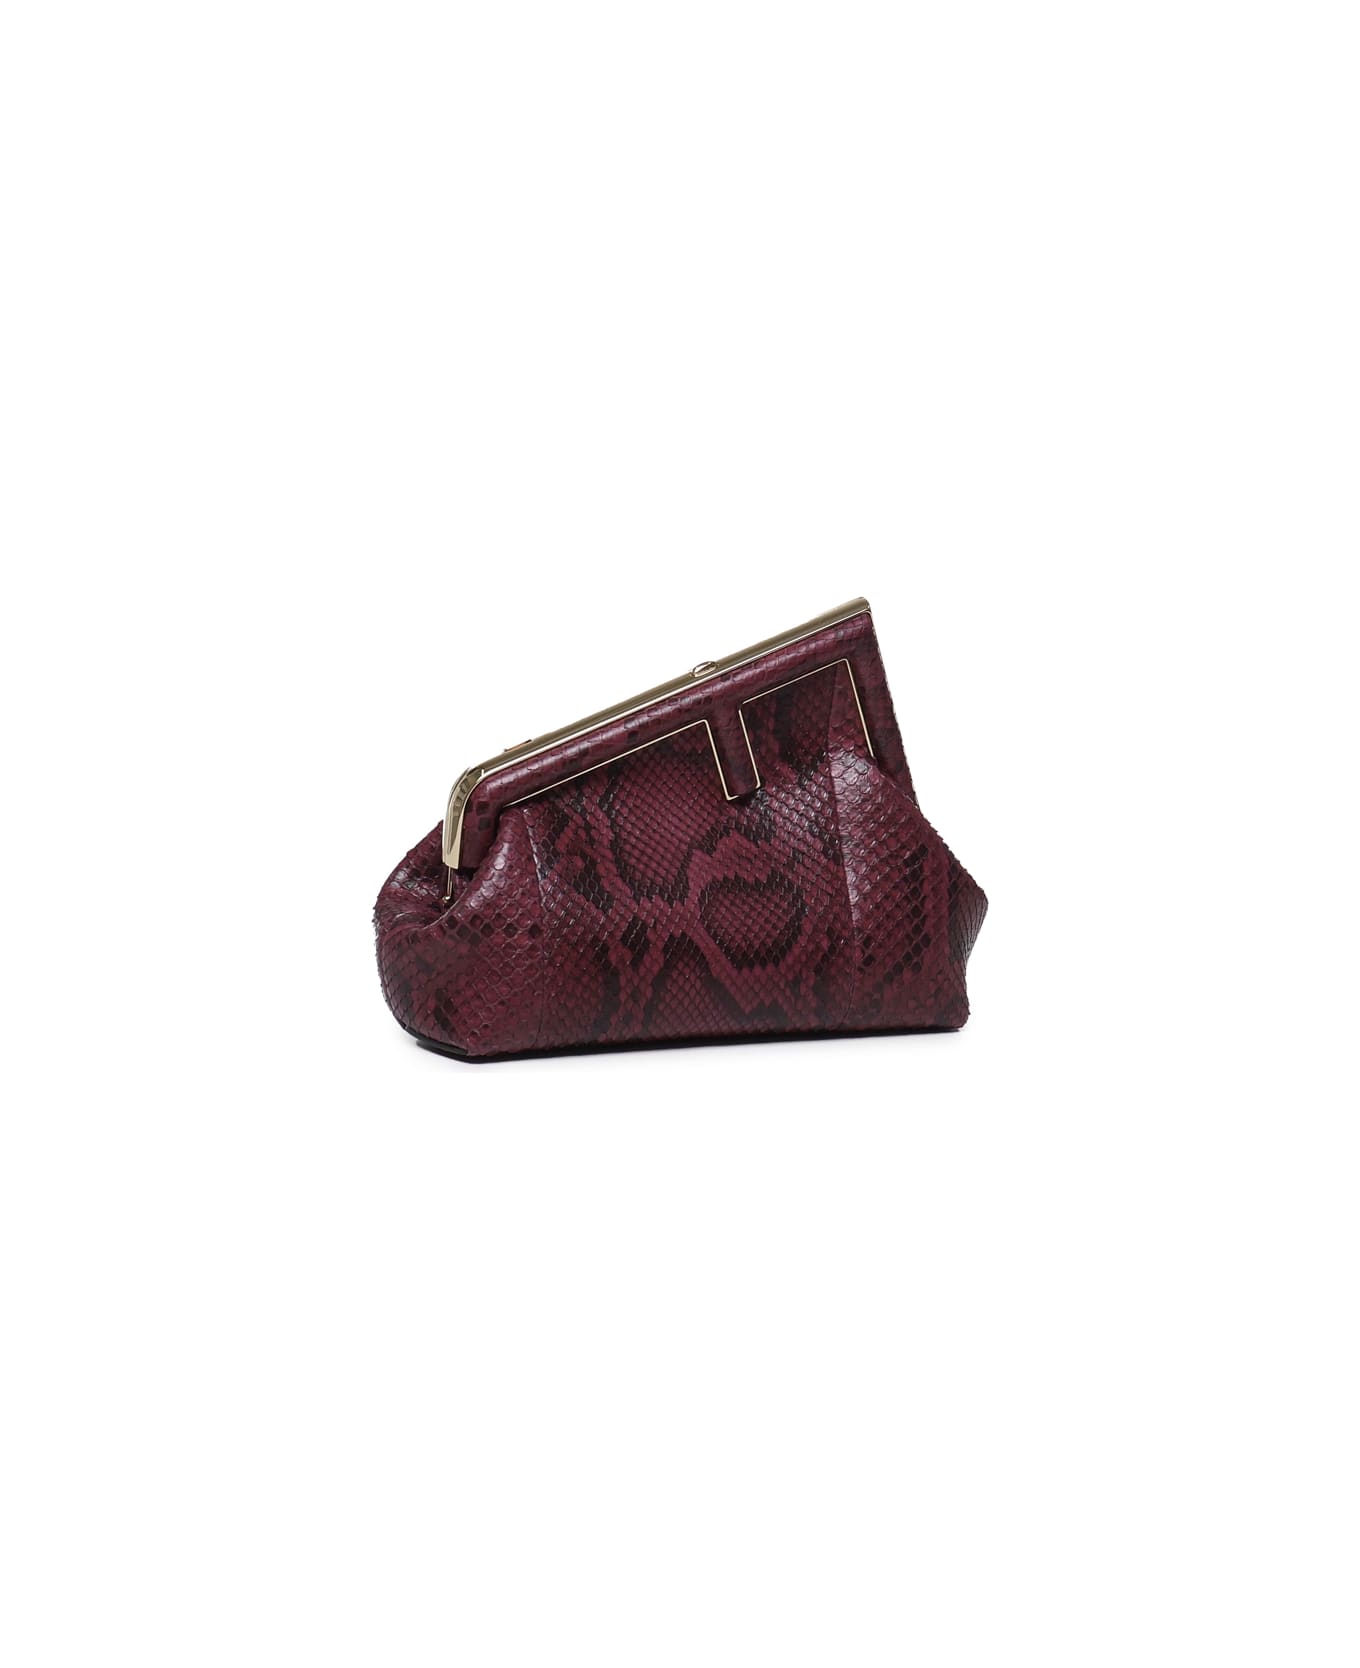 Fendi First Small - Bordeaux バッグ